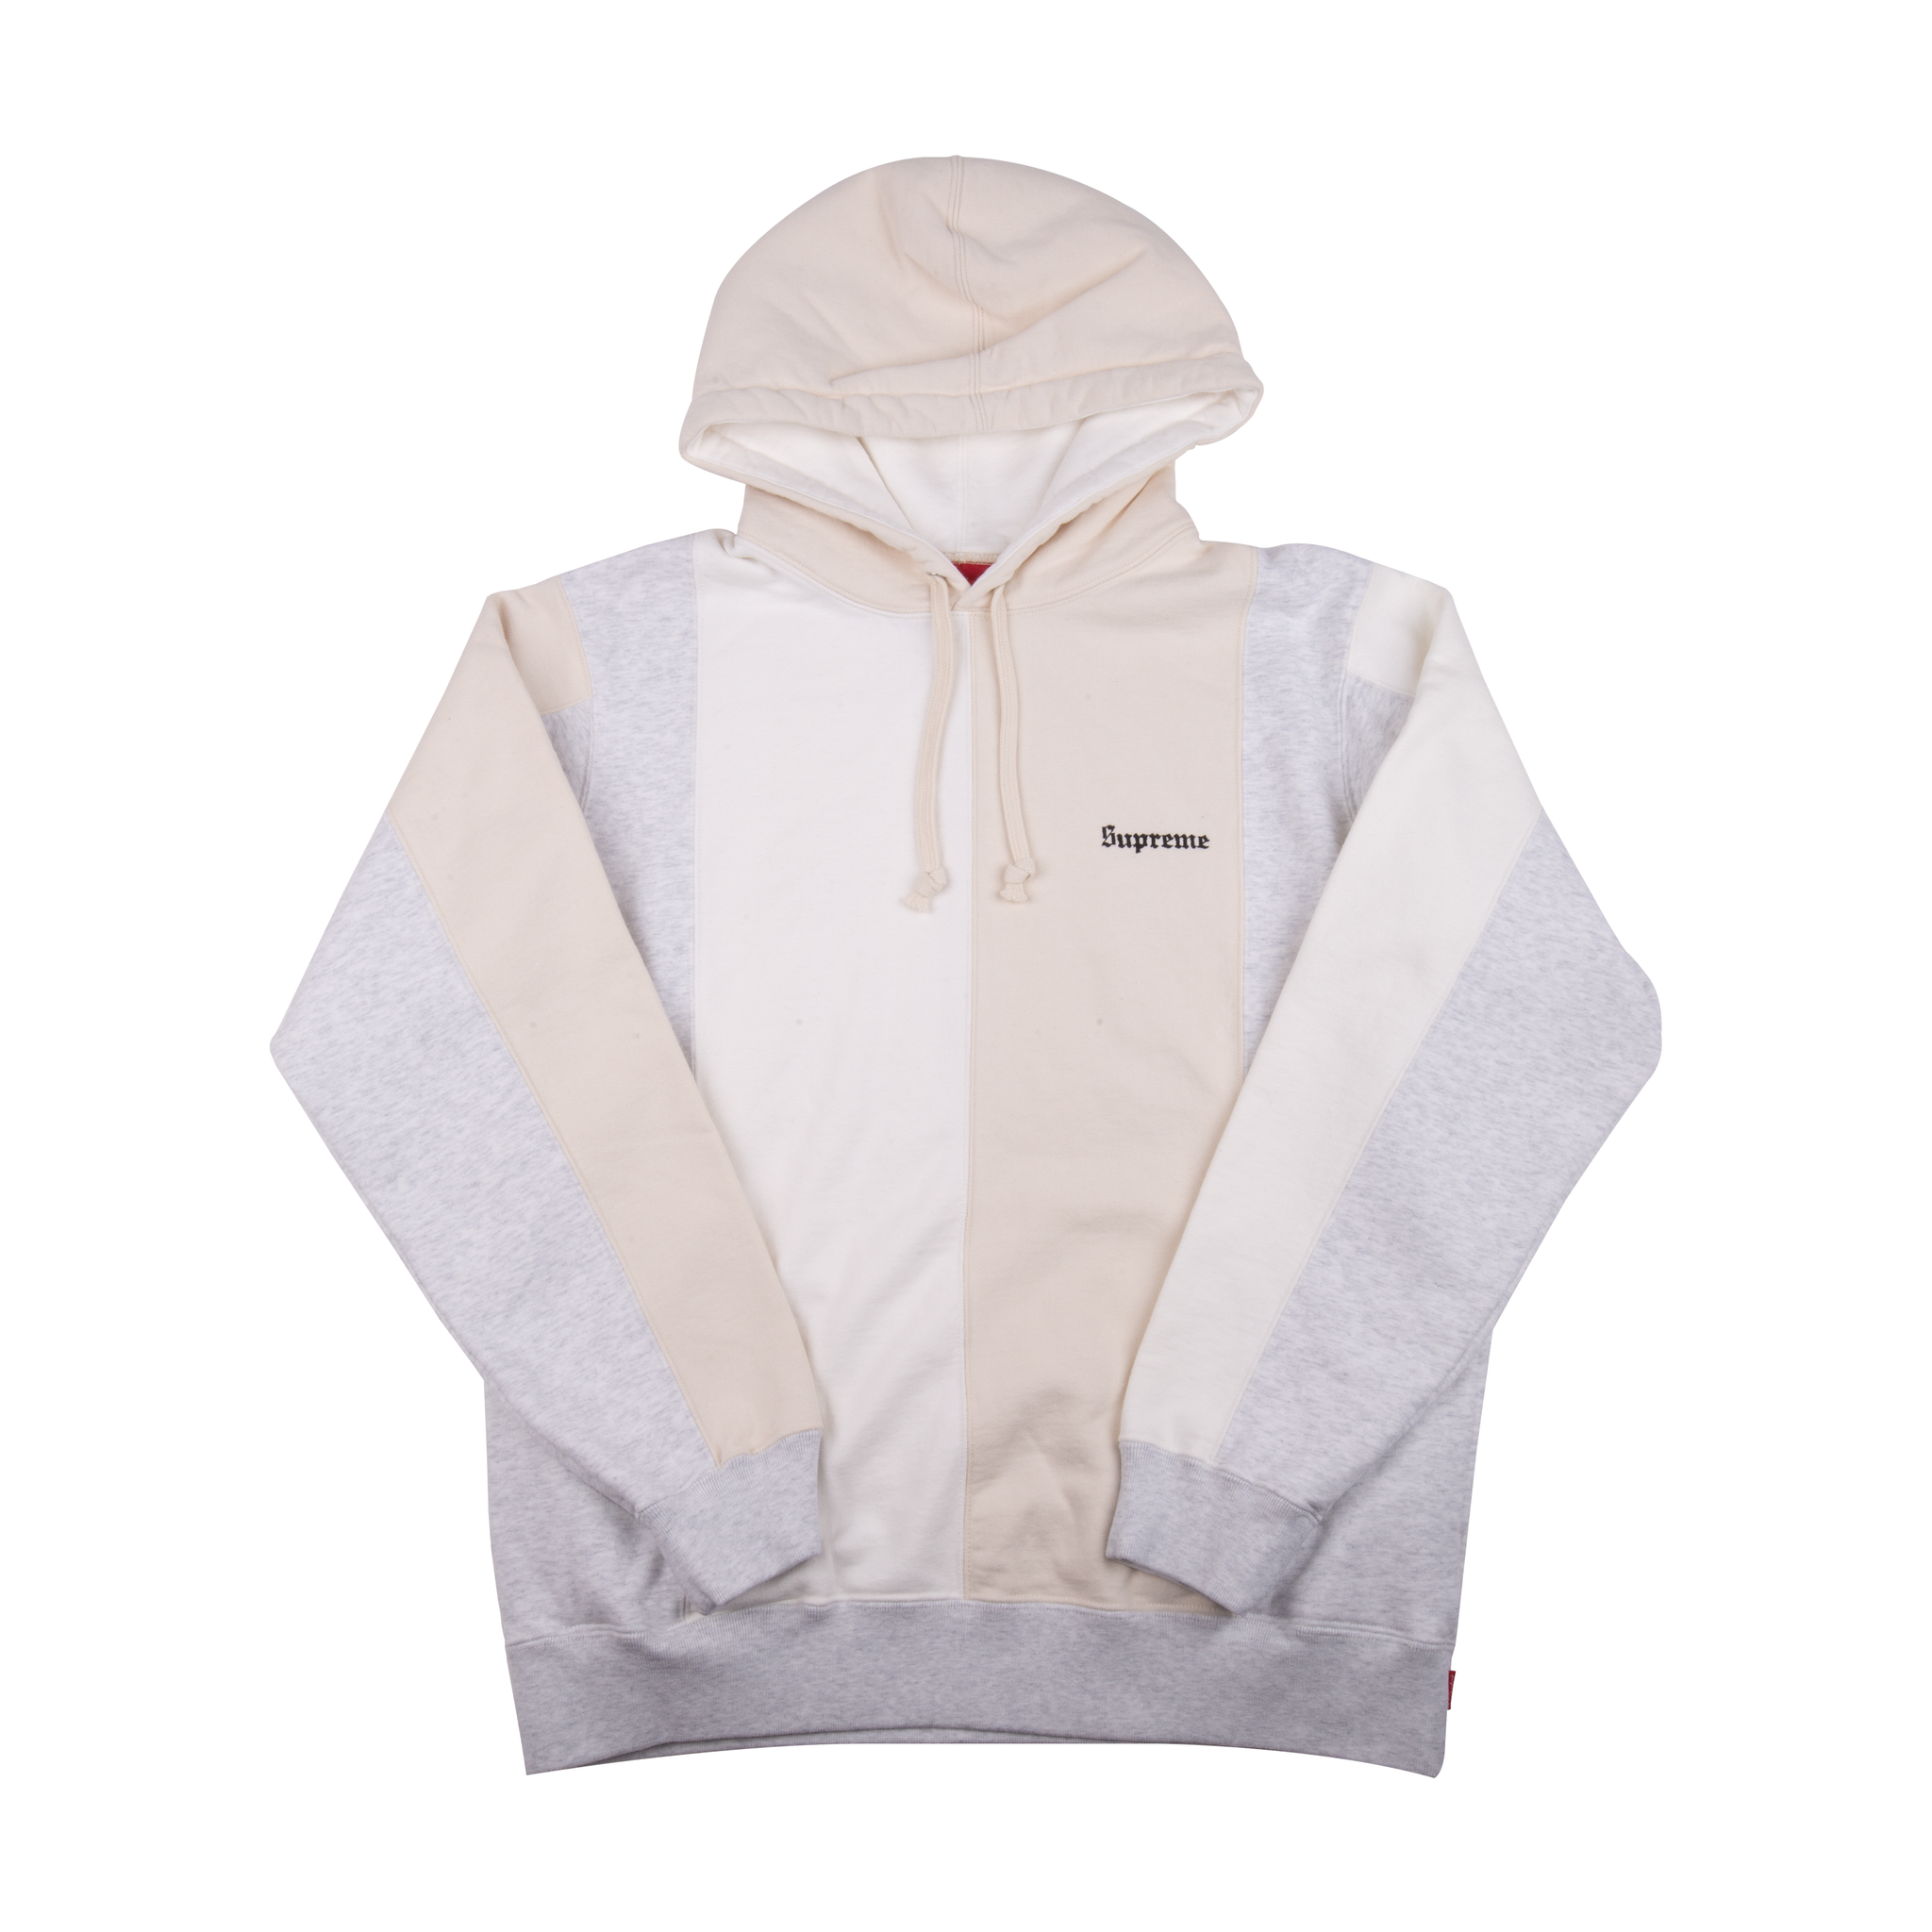 Supreme Ash Grey Tricolor Hoodie – On The Arm